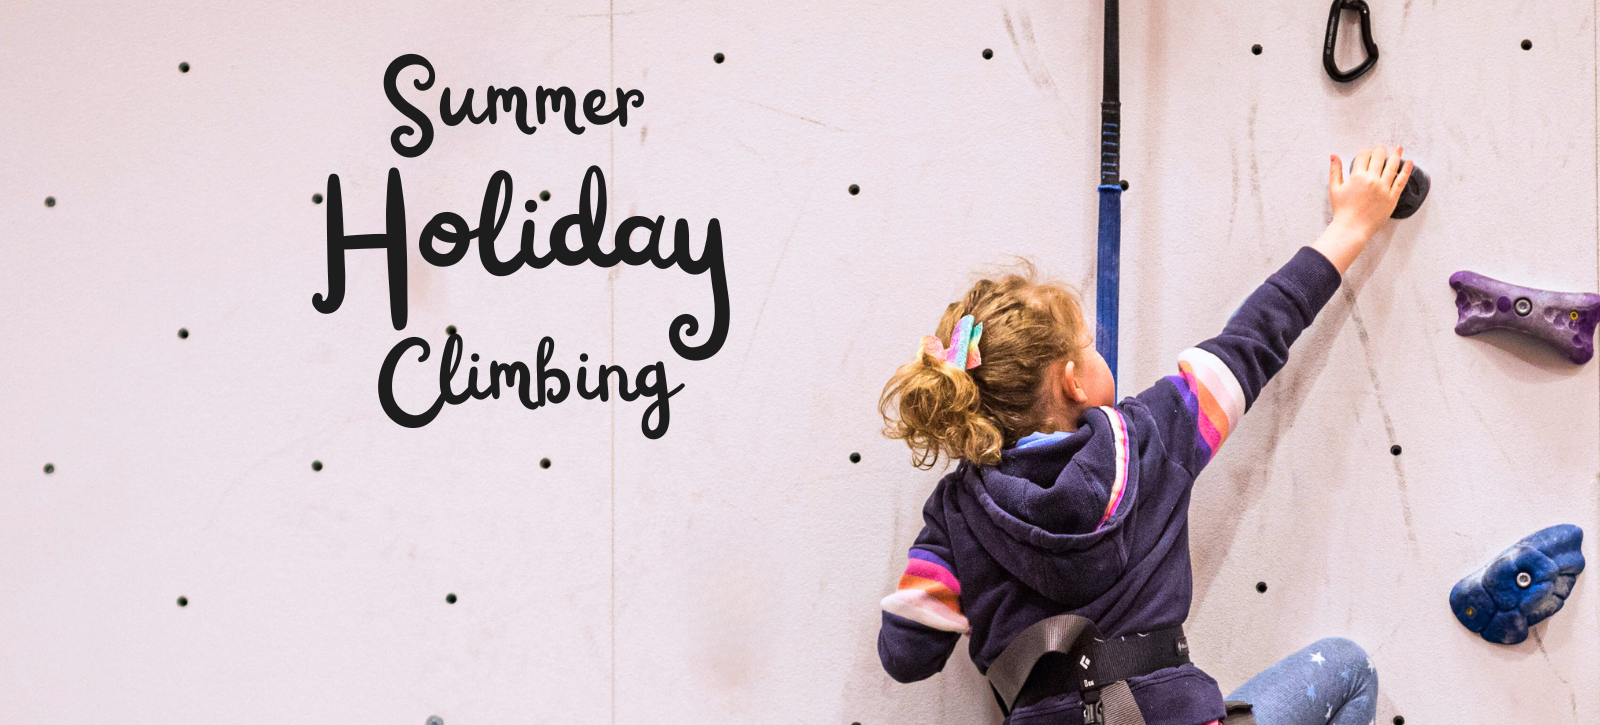 A kid climbing on an auto belay during a kids summer holiday climbing session.